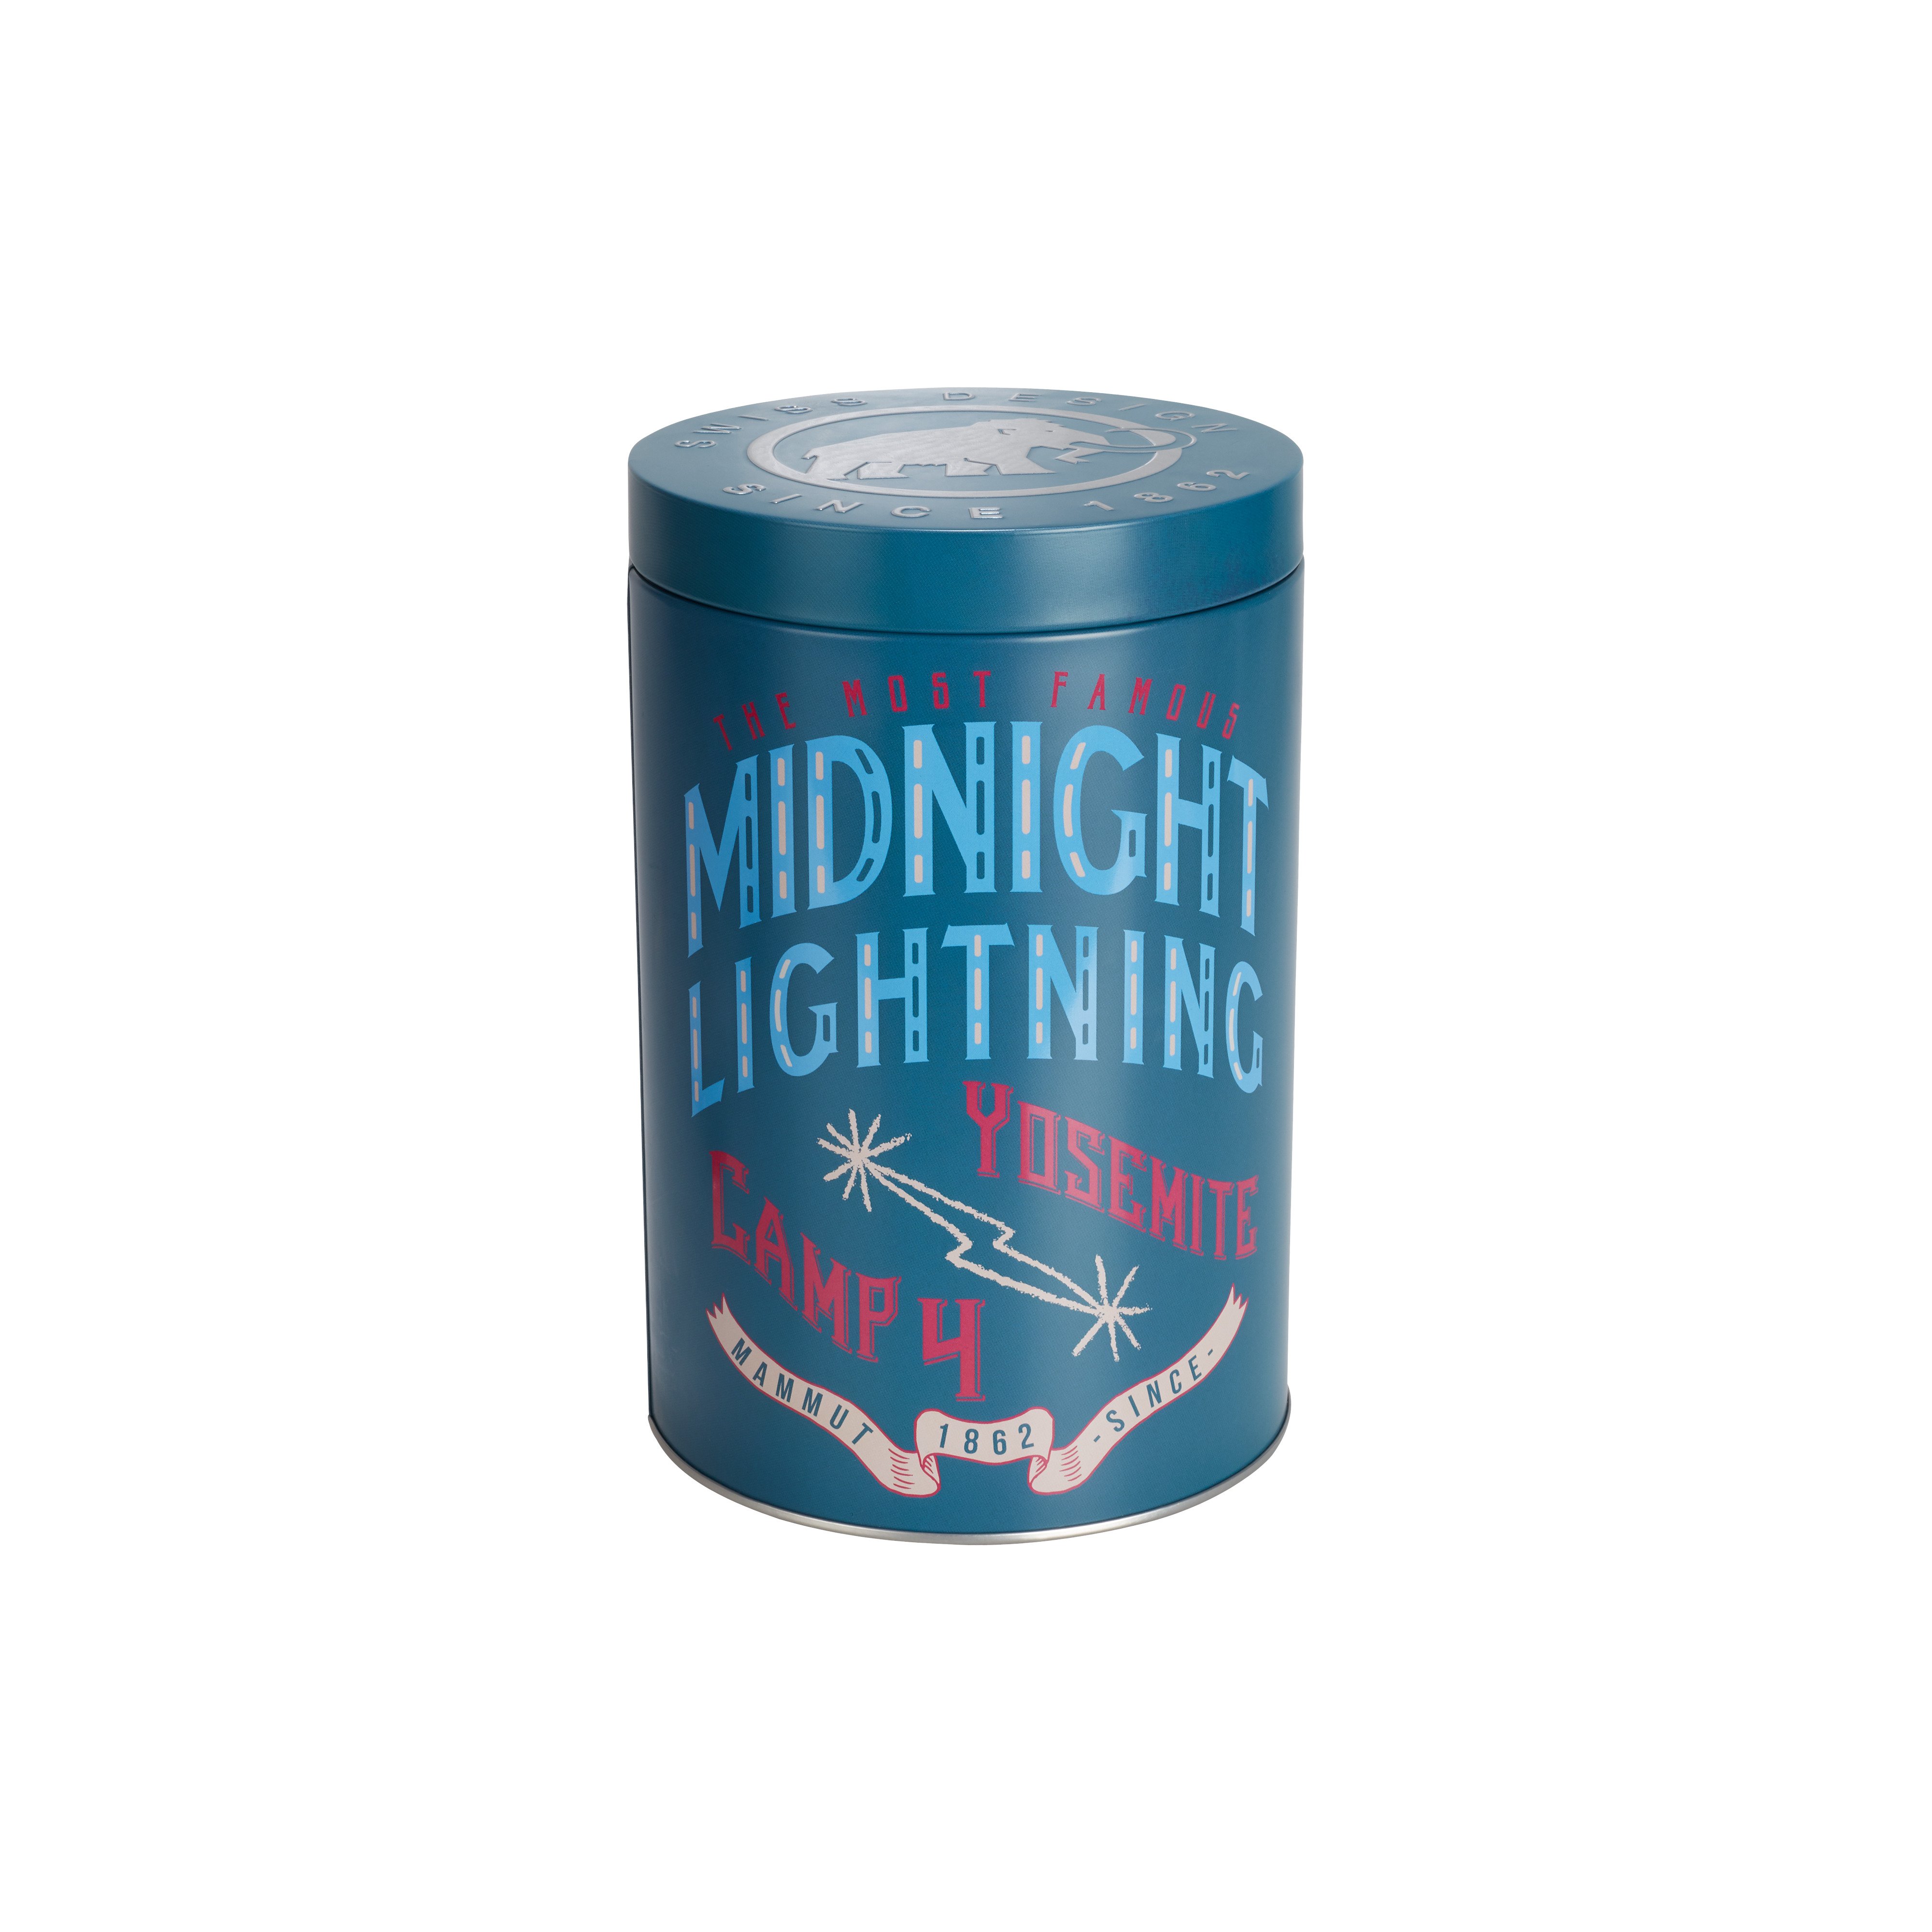 Pure Chalk Collectors Box - midnight lightning, one size product image